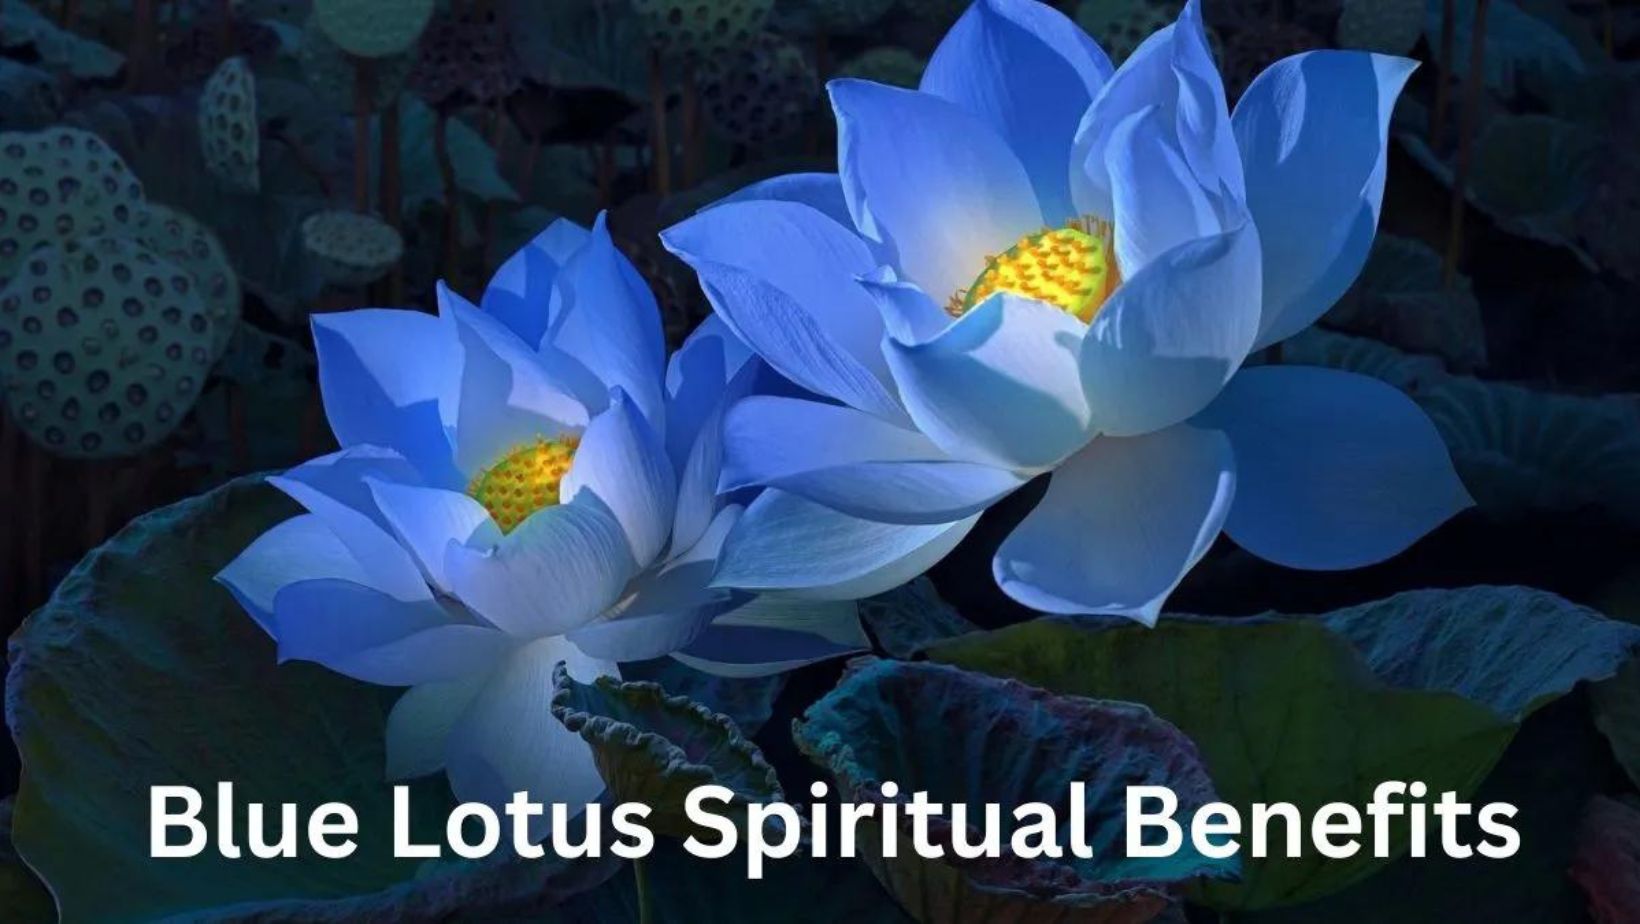 Blue Lotus in Ancient Egypt